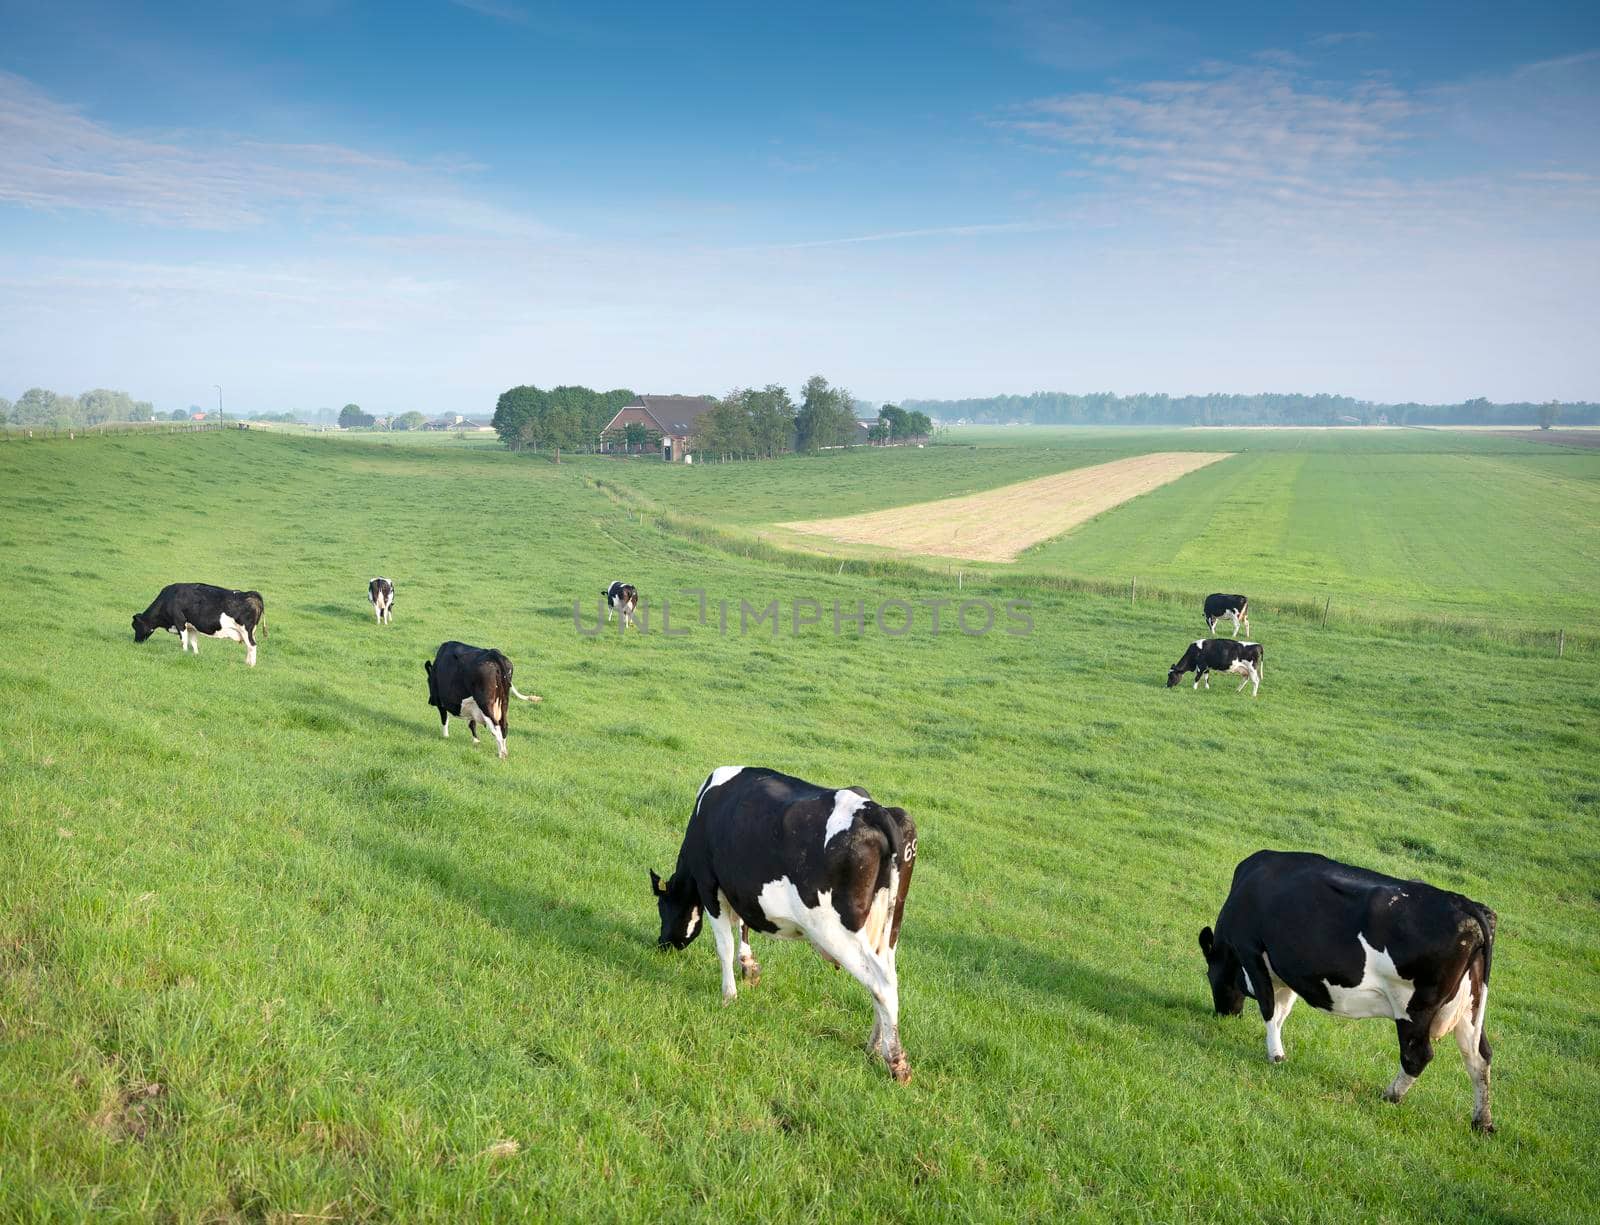 black and white spotted cows in green grassy meadow under blue sky seen from height of dyke in the netherlands by ahavelaar